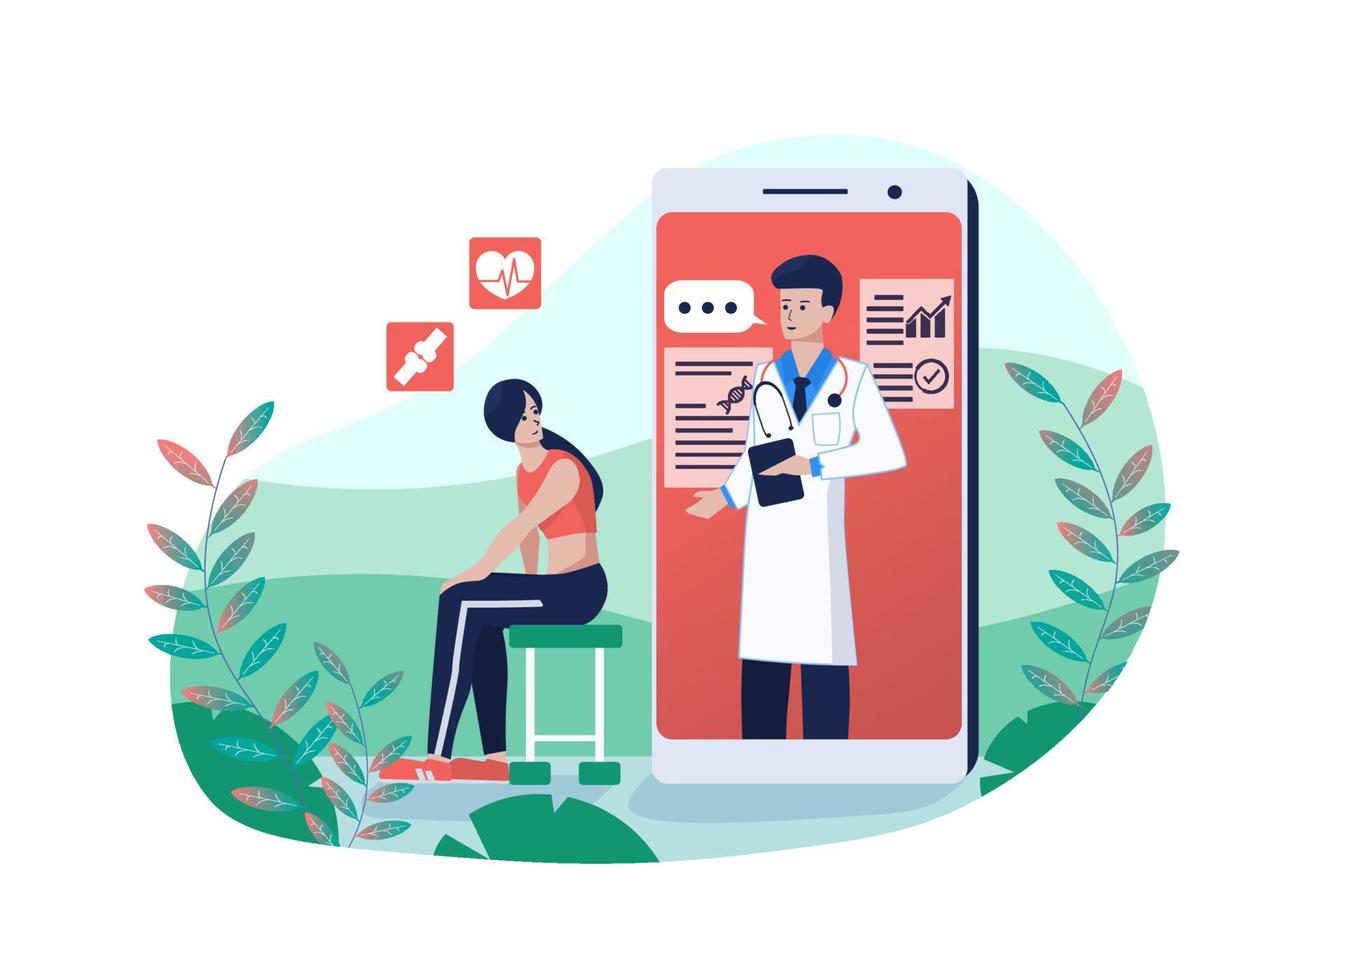 Woman having an online consultation with professional doctor on smartphone. Illustration of medical technology, healthcare and online doctor consultation concept vector